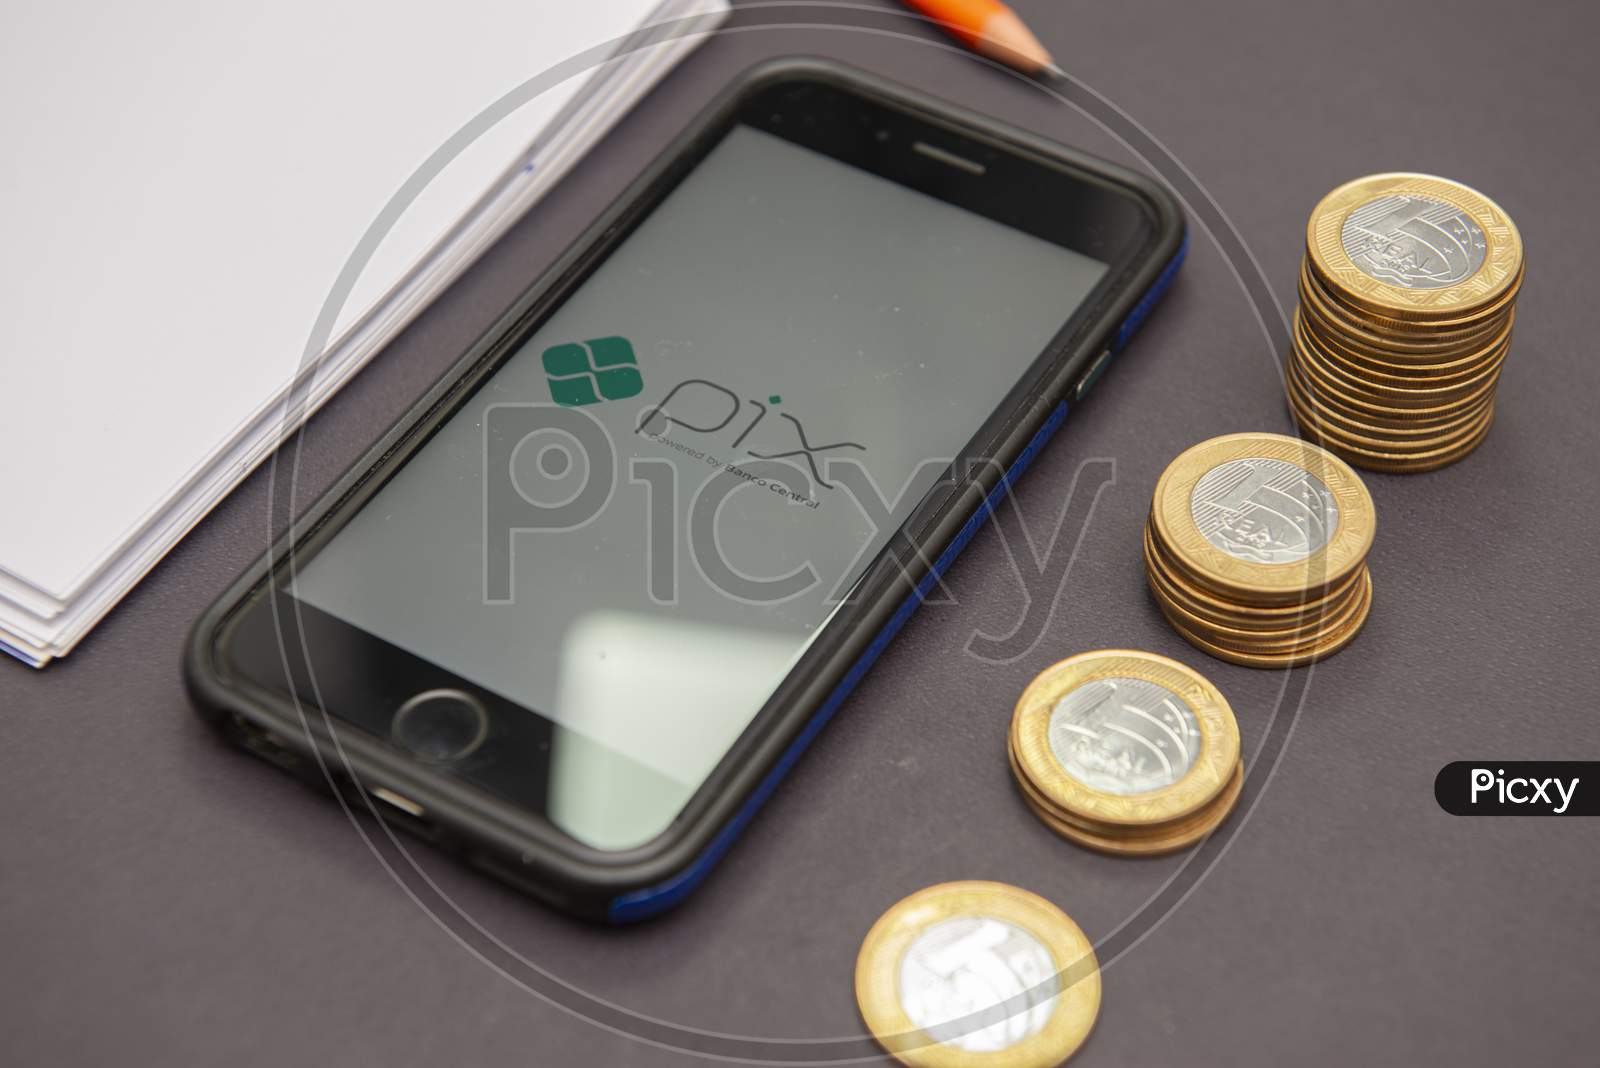 Florianopolis, Brazil. 28/09/2020: Top View Of Pix Logo On Smartphone Screen Next To Growing Piles Of Coins. Pix Is ​​A New And Faster Brazilian Money Transfer System - Central Bank. Selective Focus.